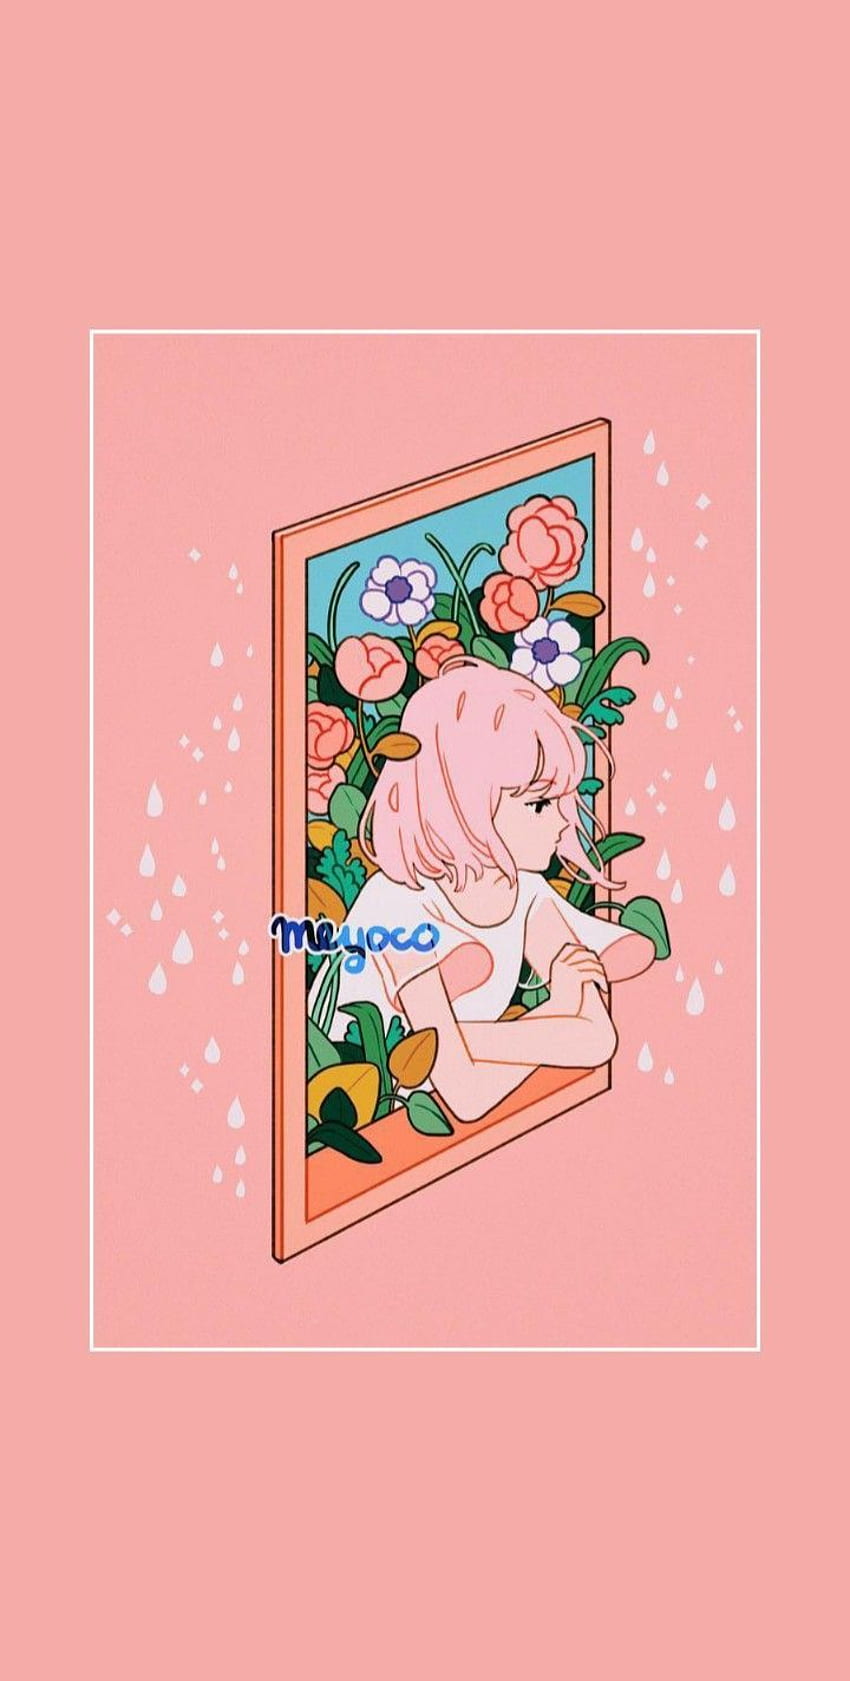 Drawing is Meyoco's while editing (or resizing?) is mine. [follow on ...